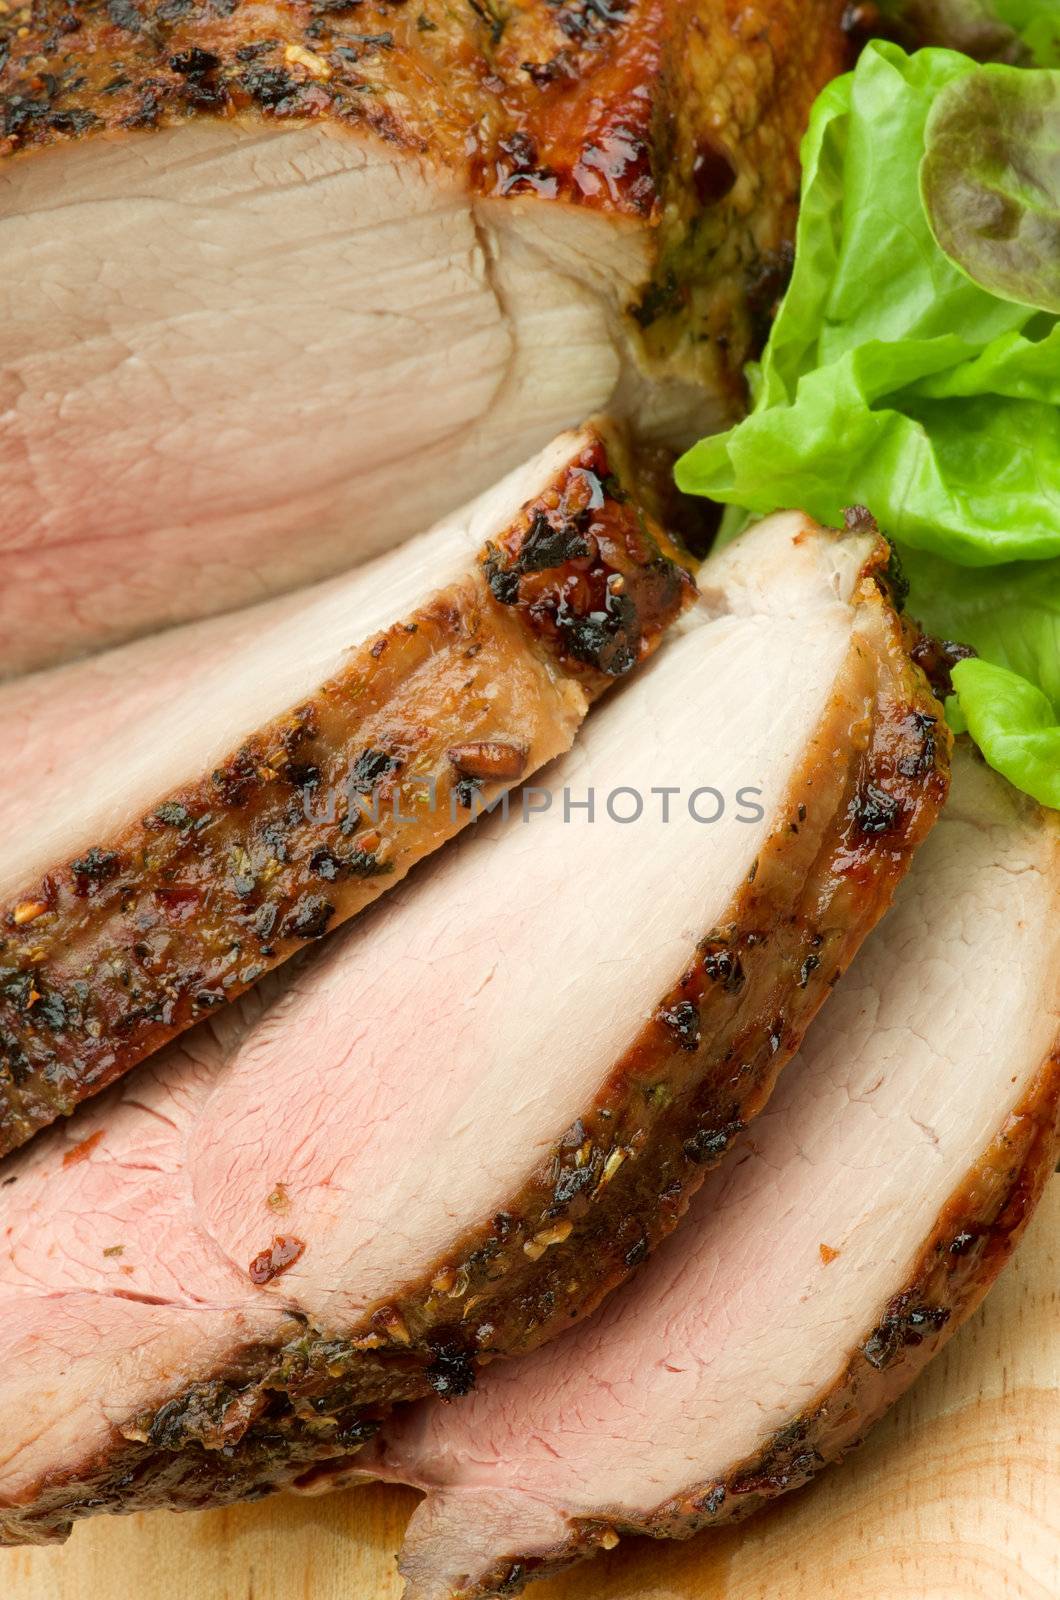 Slices of Ripe Roasted in Herbs Beef Medium Rare with Lettuce on Wood Cutting Board closeup